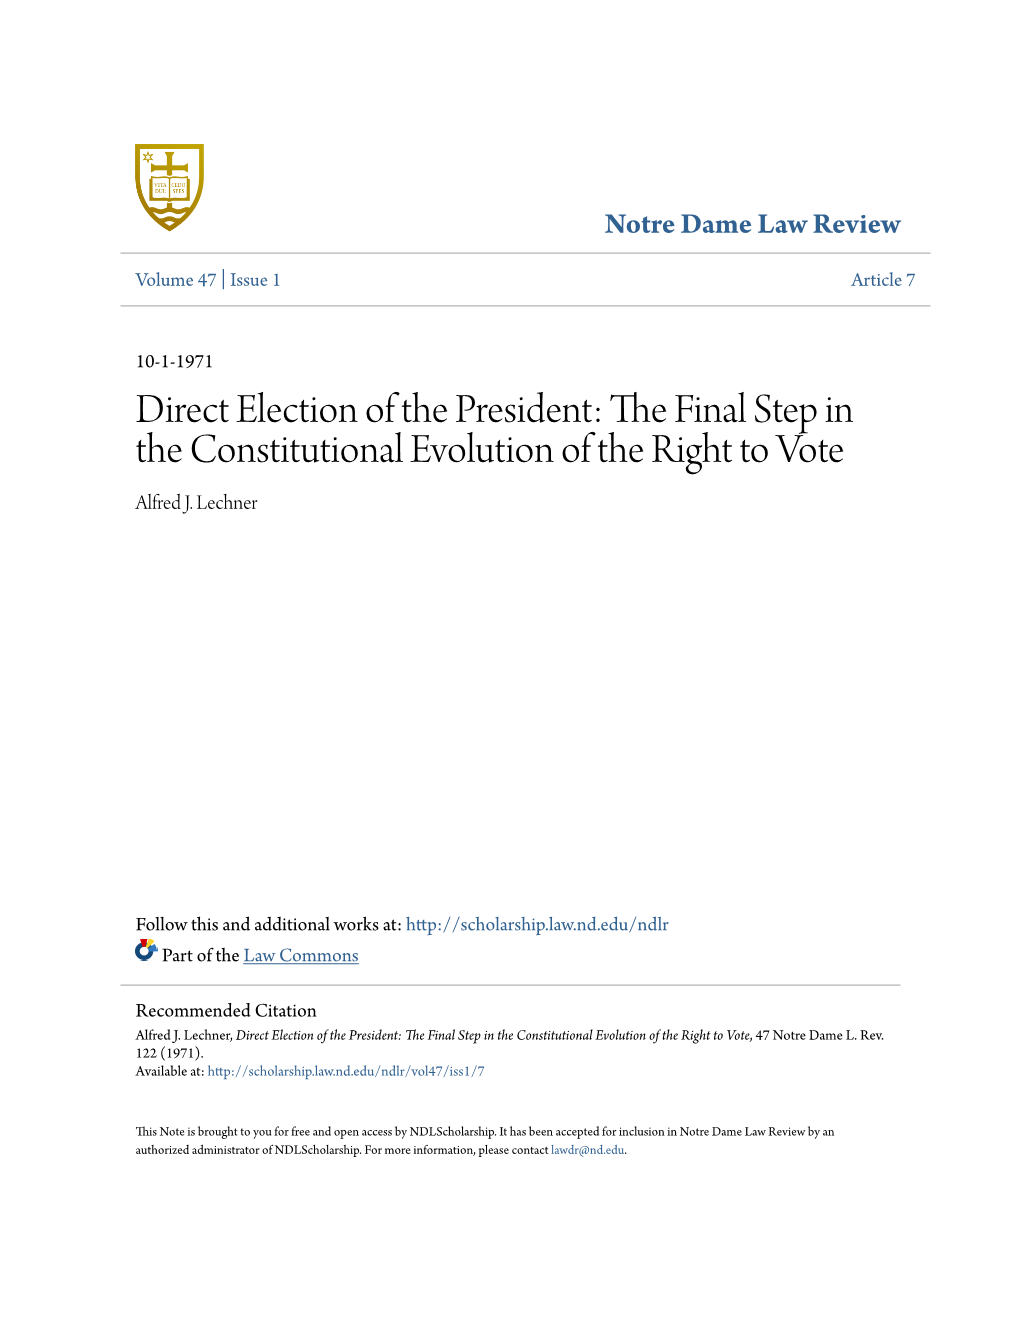 Direct Election of the President: the Inf Al Step in the Constitutional Evolution of the Right to Vote Alfred J